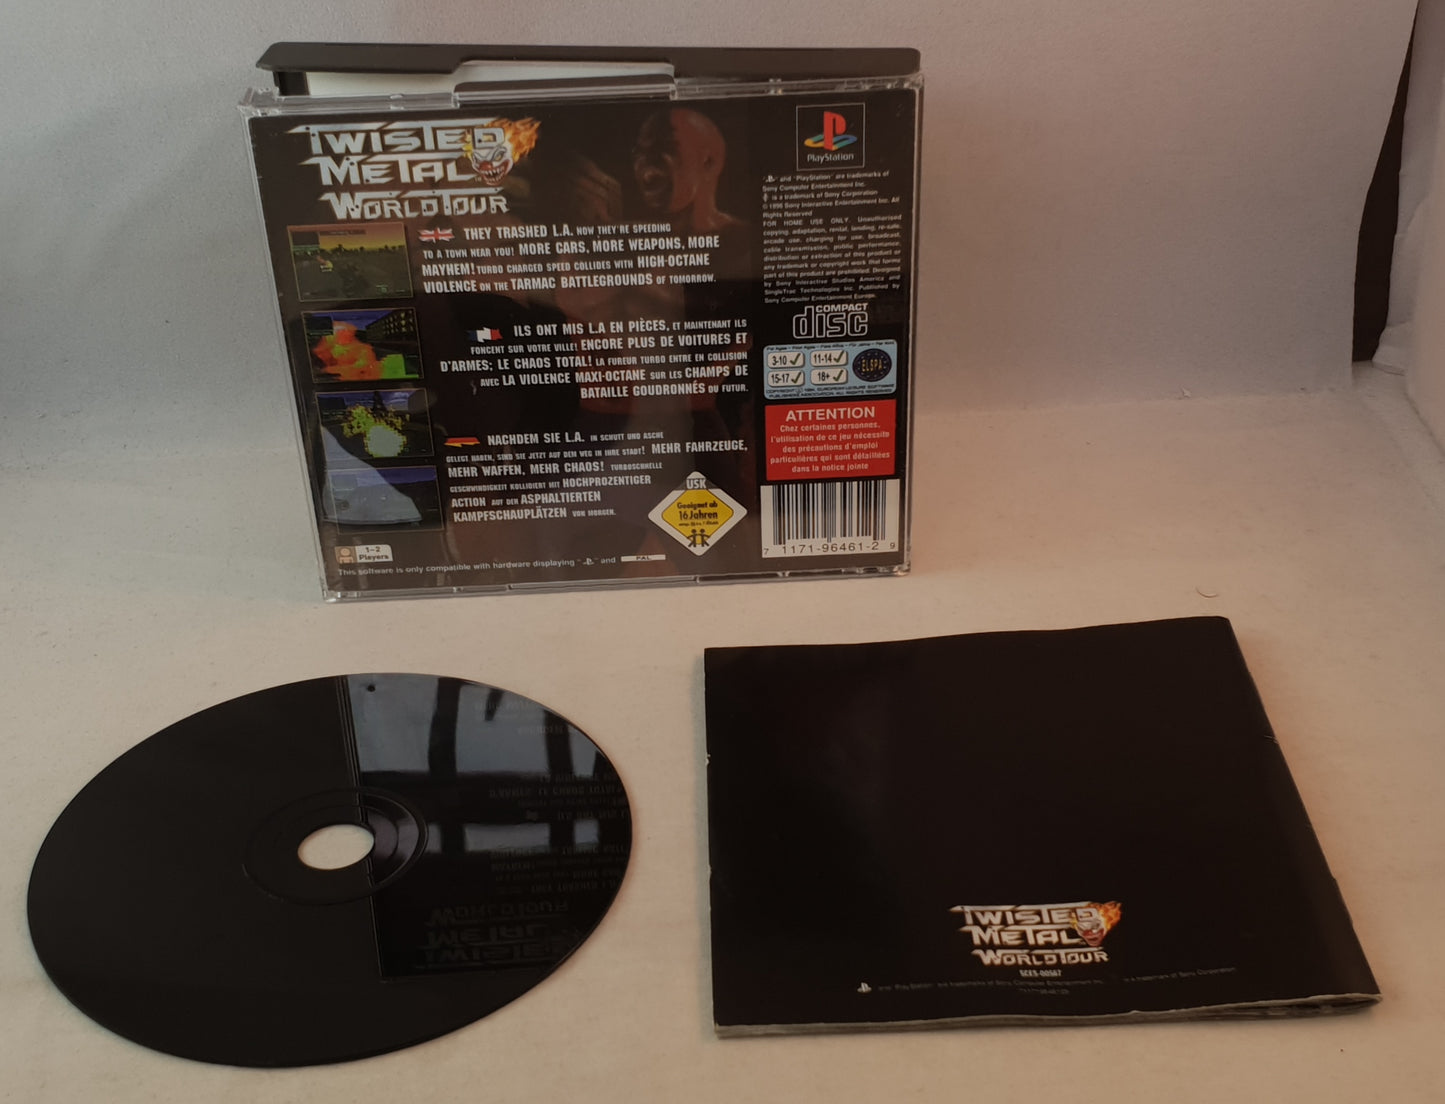 Twisted Metal World Tour PS1 (Sony Playstation 1) game